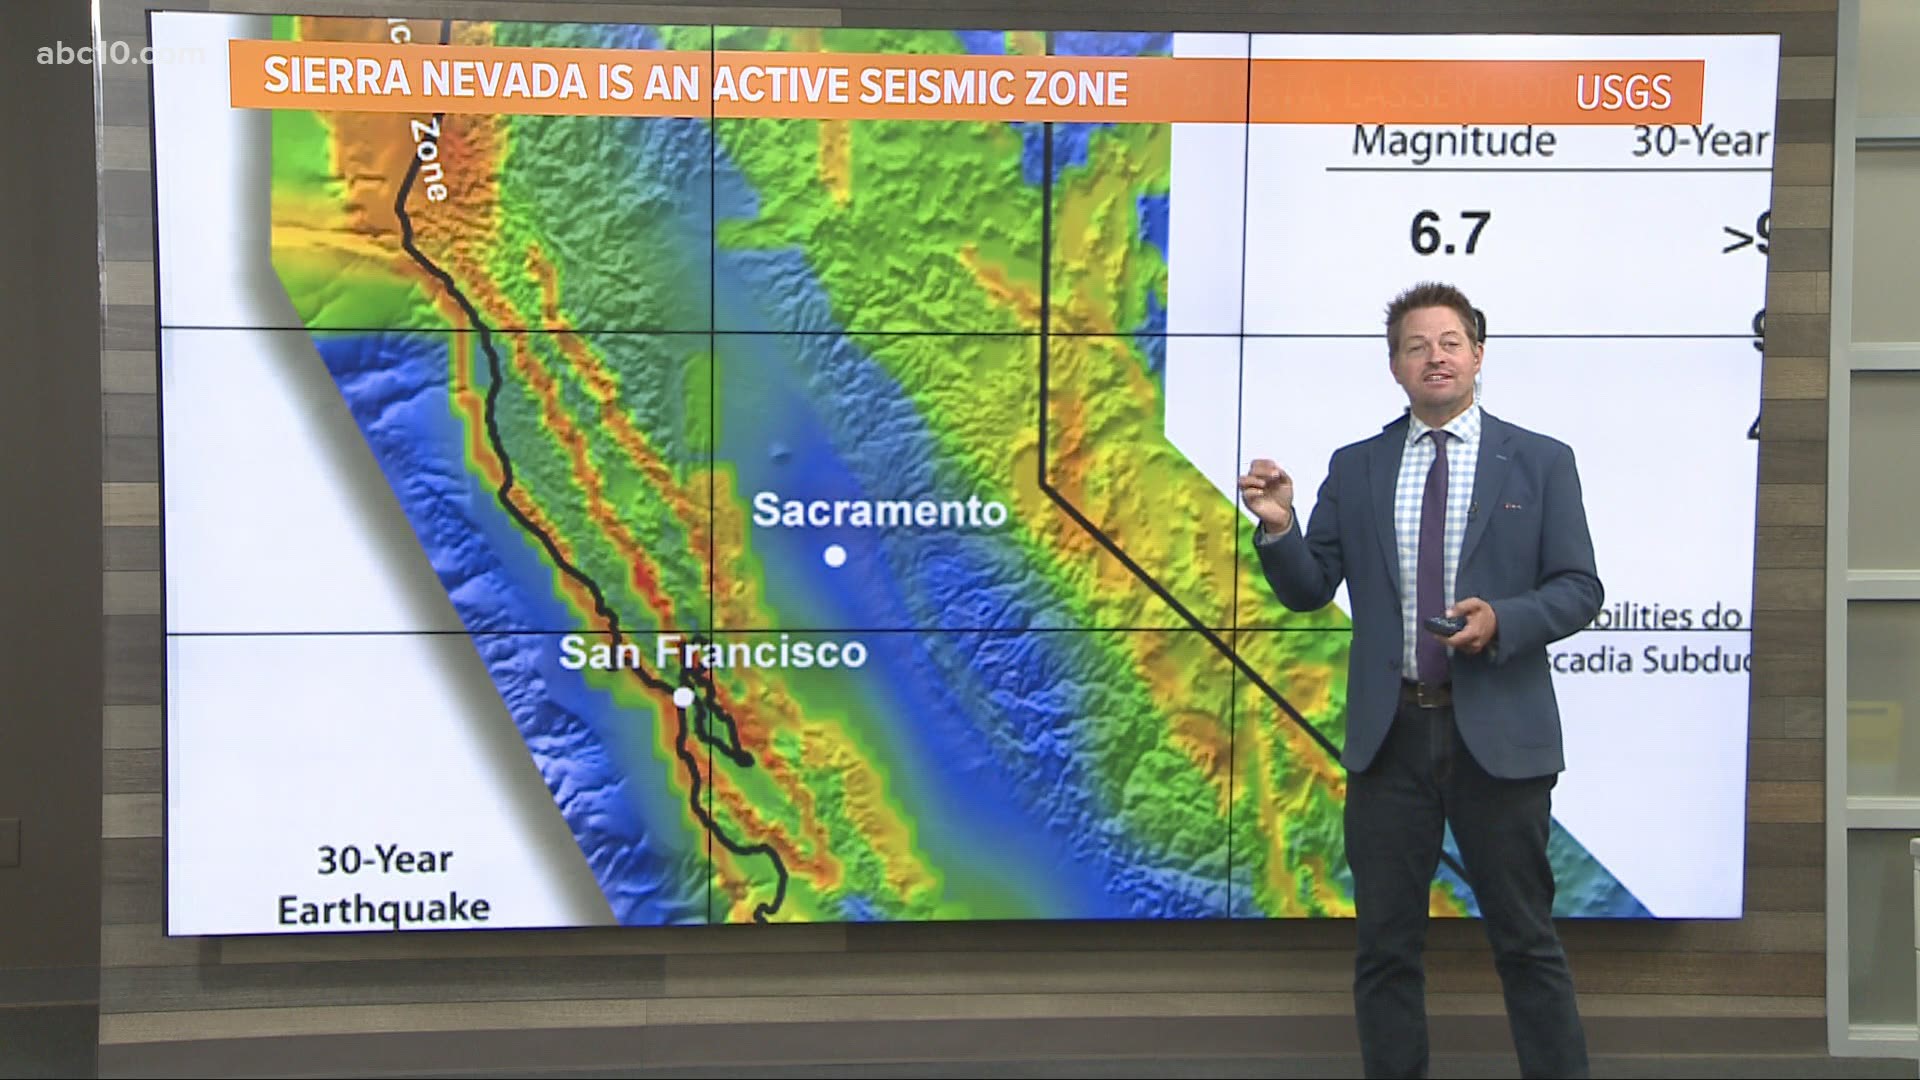 Meteorologist Rob Carlmark breaks down the importance of faults in California and how they play a part in earthquakes.